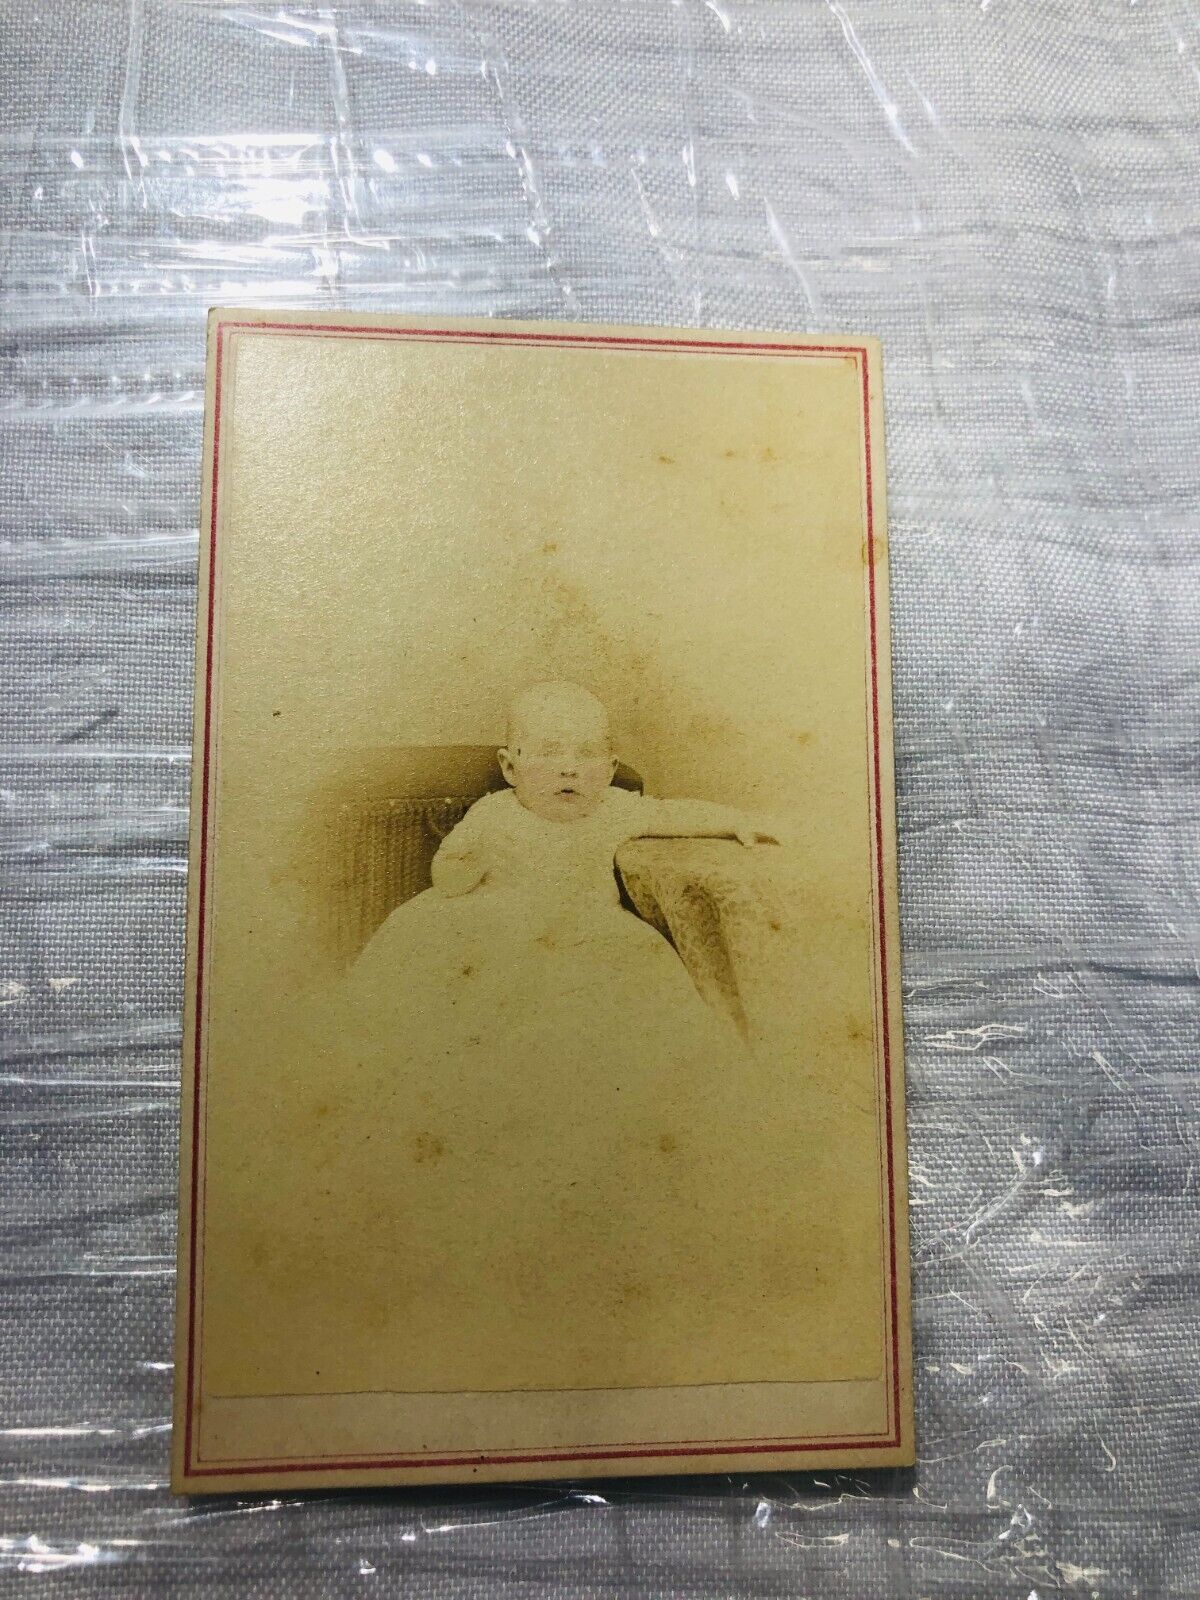 Novelty 1890 CabinetCard Baby first picture St. Louis MO Photobooth